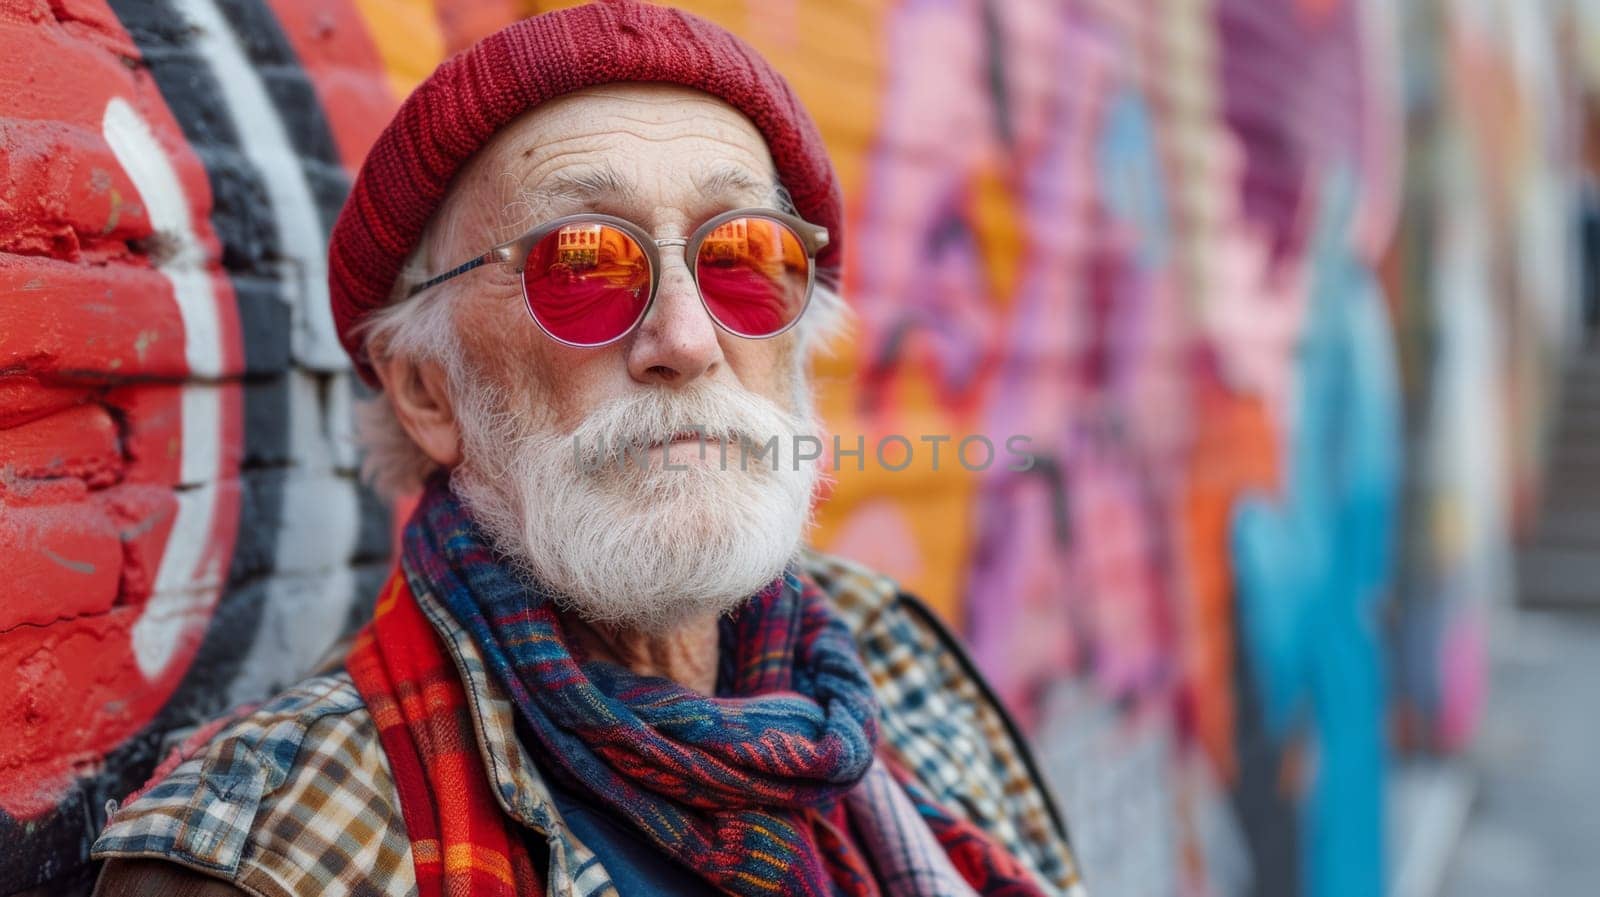 A man with a beard and glasses wearing red scarf, hat and sunglasses